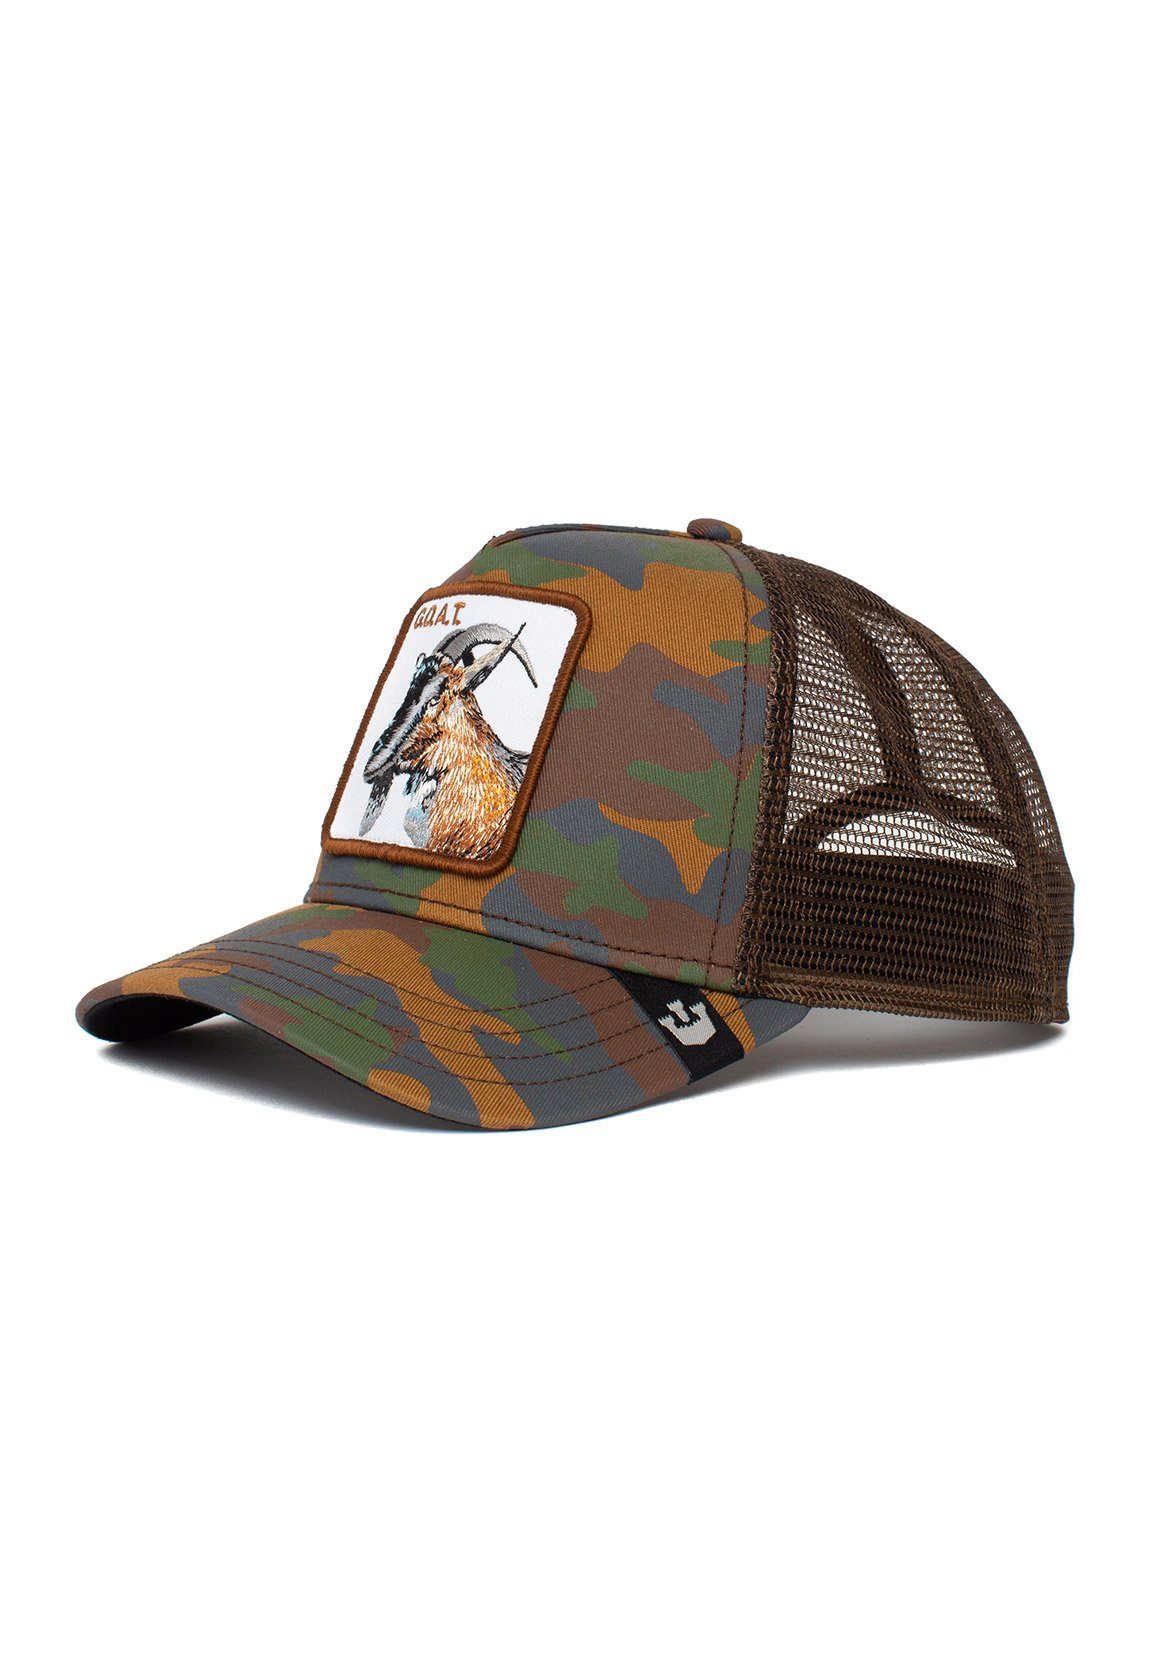 GOORIN Bros. Trucker Cap Goorin Bros. Trucker Cap GOAT Camouflage Clay Henry